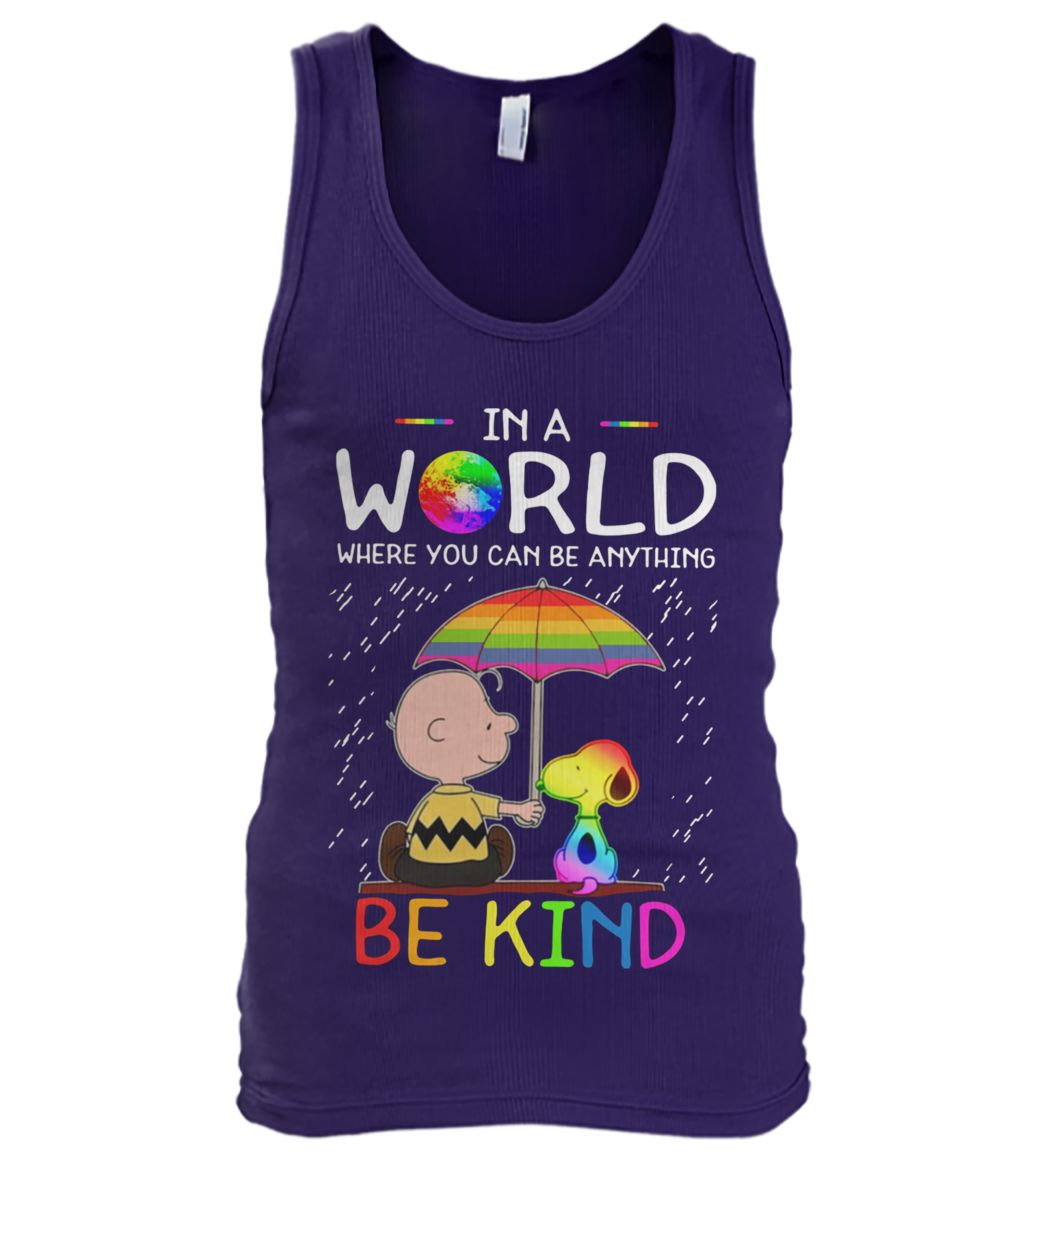 Charlie brown snoopy in a world where you can be anything be kind lgbt men's tank top